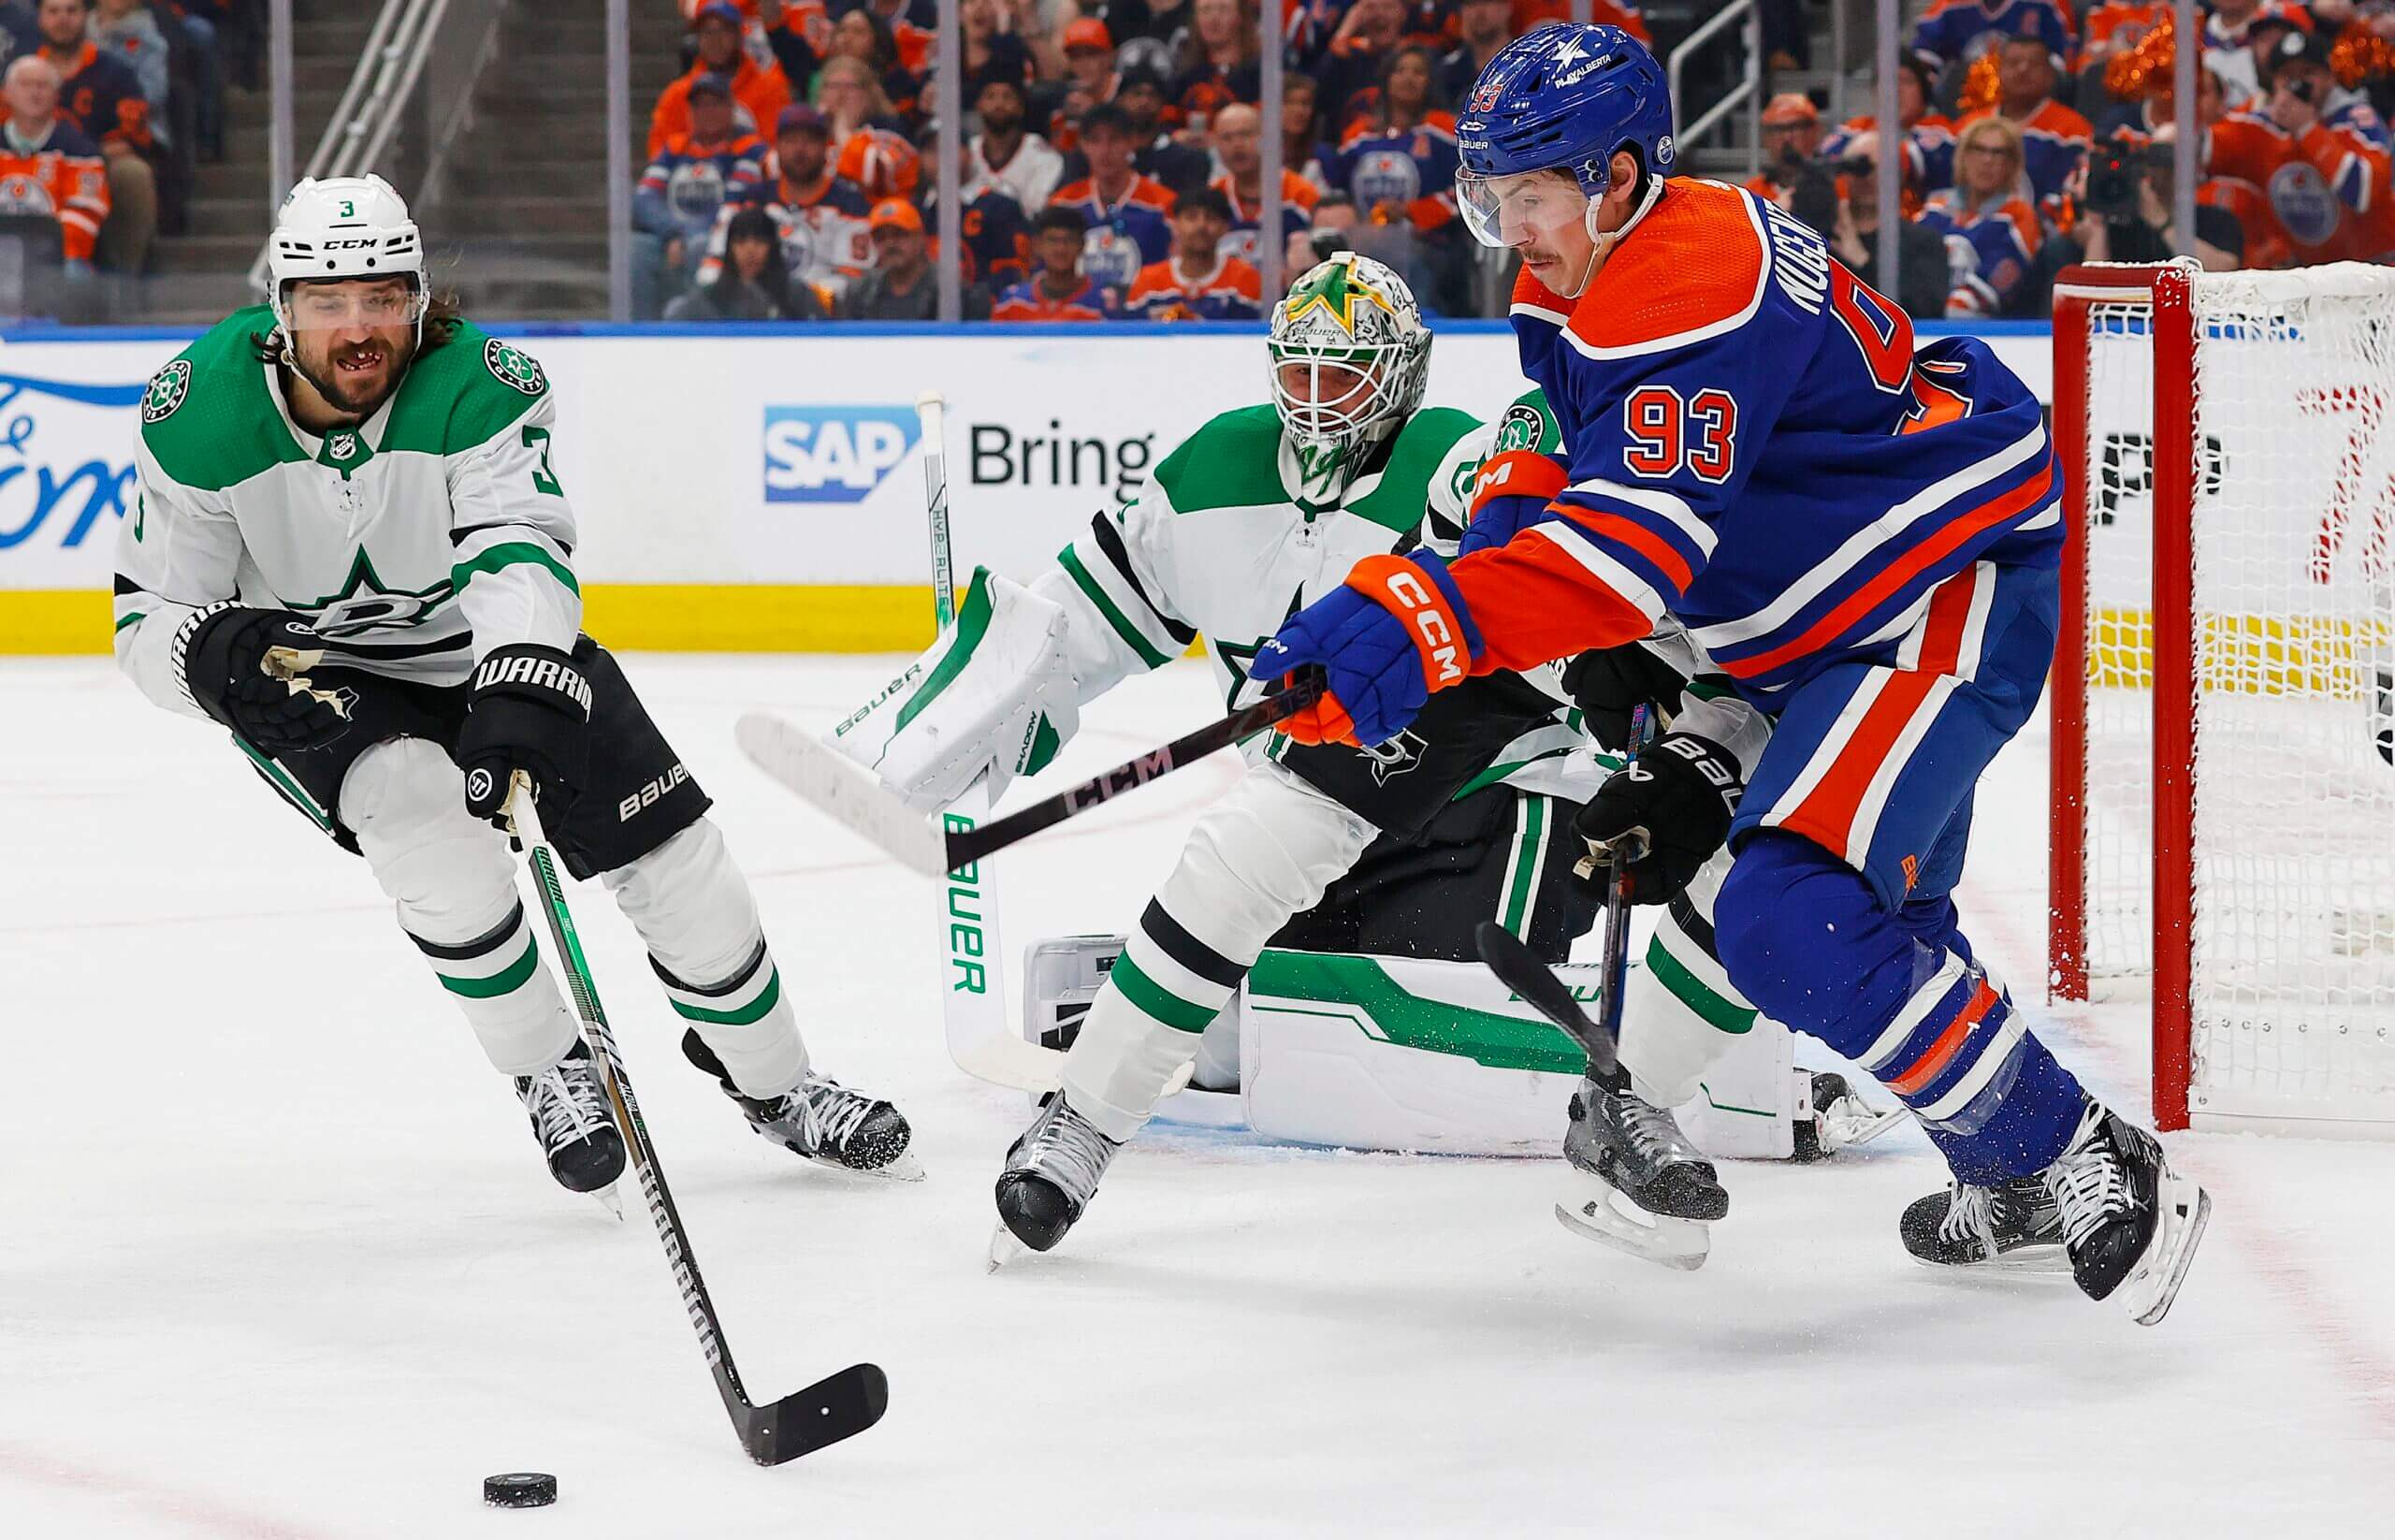 As Chris Tanev's status looms large, 3 reasons the Oilers and Stars can each win the West